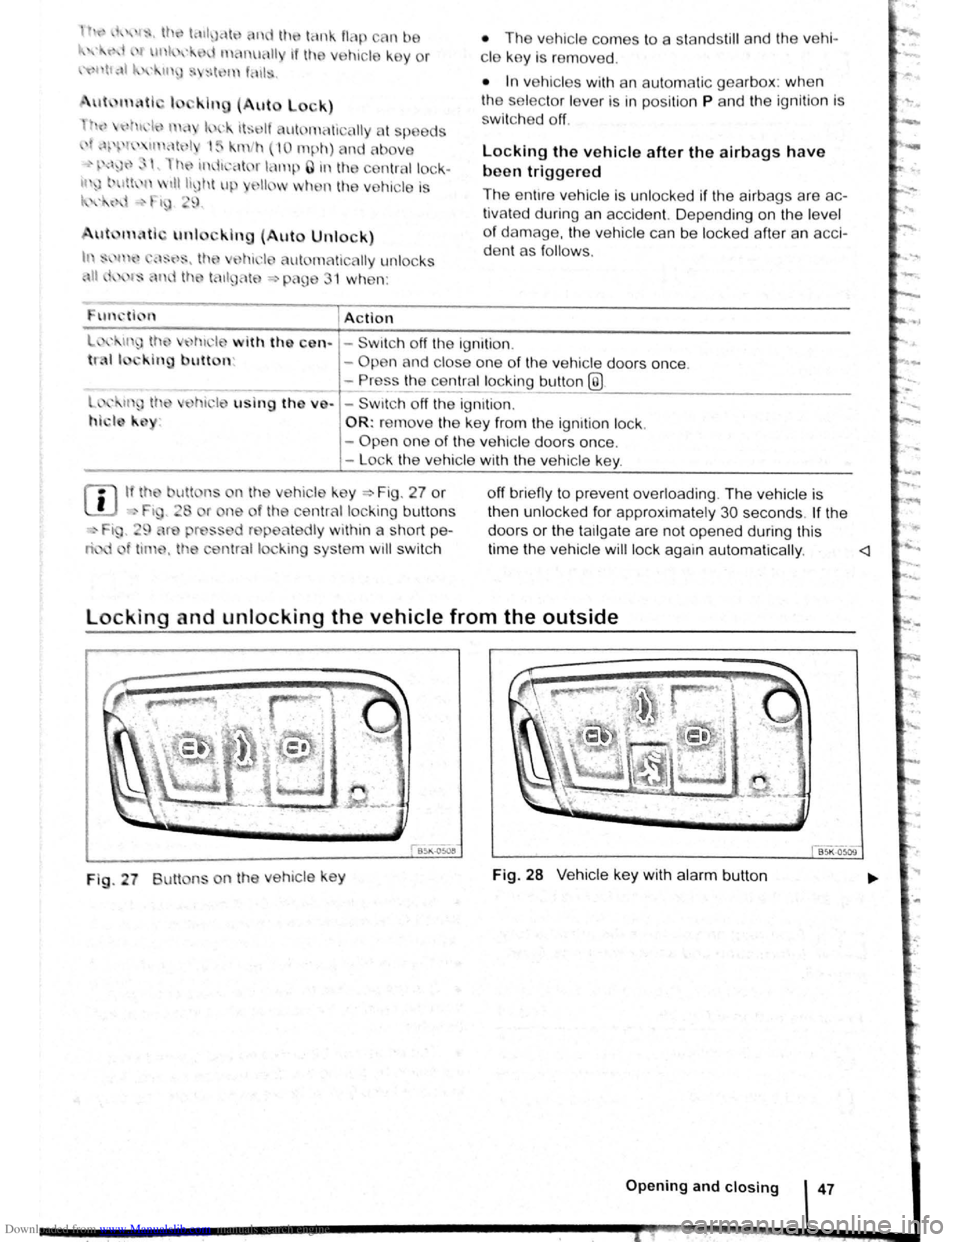 VOLKSWAGEN GOLF 2011  Owner´s Manual Downloaded from www.Manualslib.com manuals search engine  h{ ,~ I,. U rl lC1tlJclt nd th tank flap cnn  be 
·  r 1 unhx I n tFinuHII if th e ve hic le k e y or 
"'~' tf,\1 1-. • "J